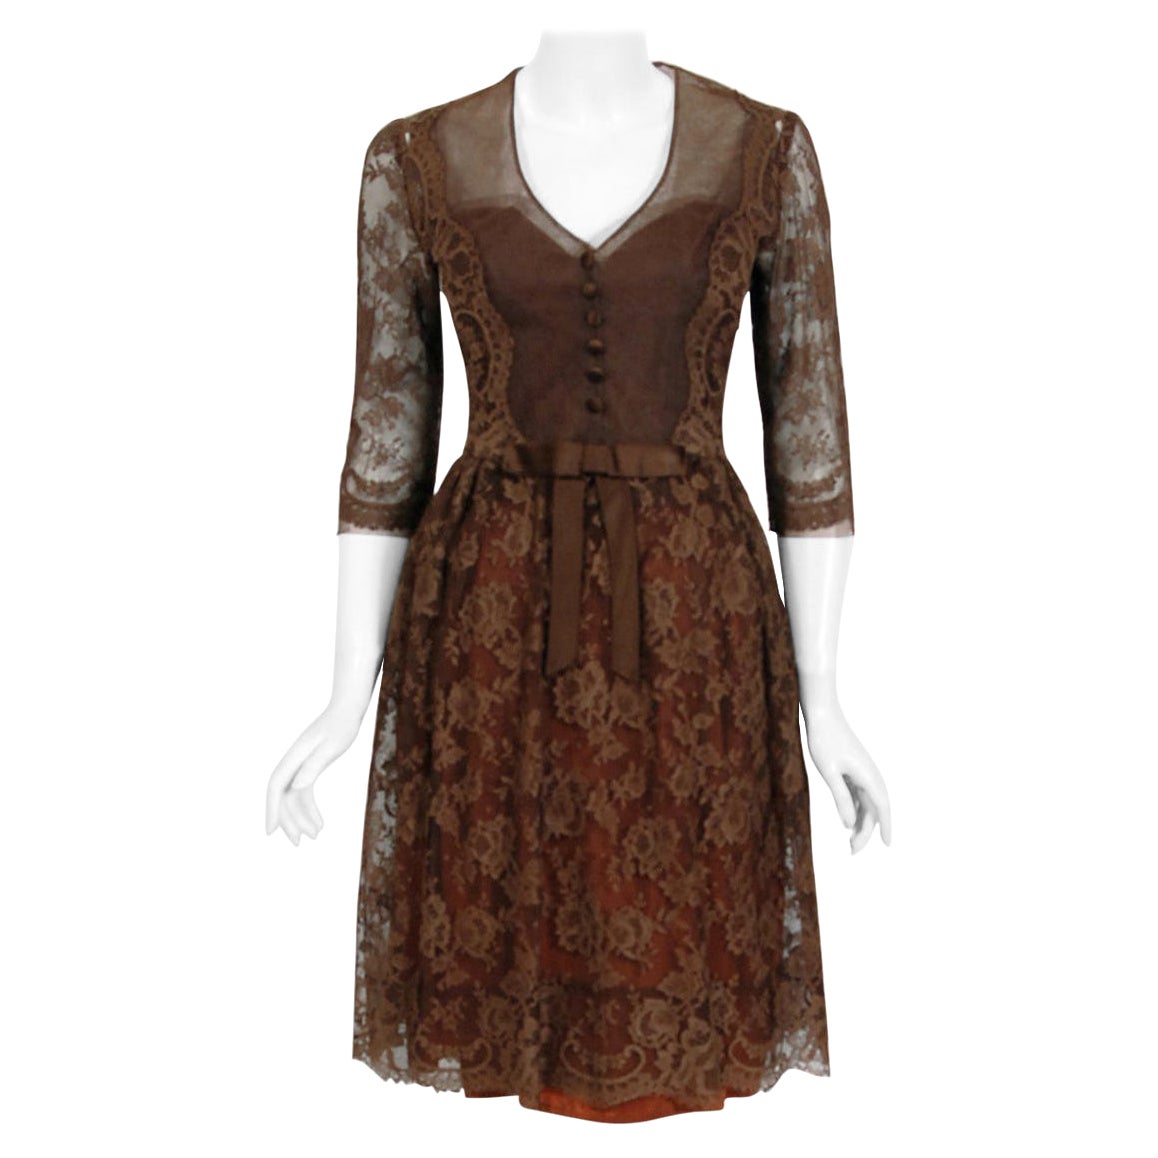 Vintage 1955 Maggy Rouff Haute Couture Brown Sheer Illusion Chantilly Lace Dress